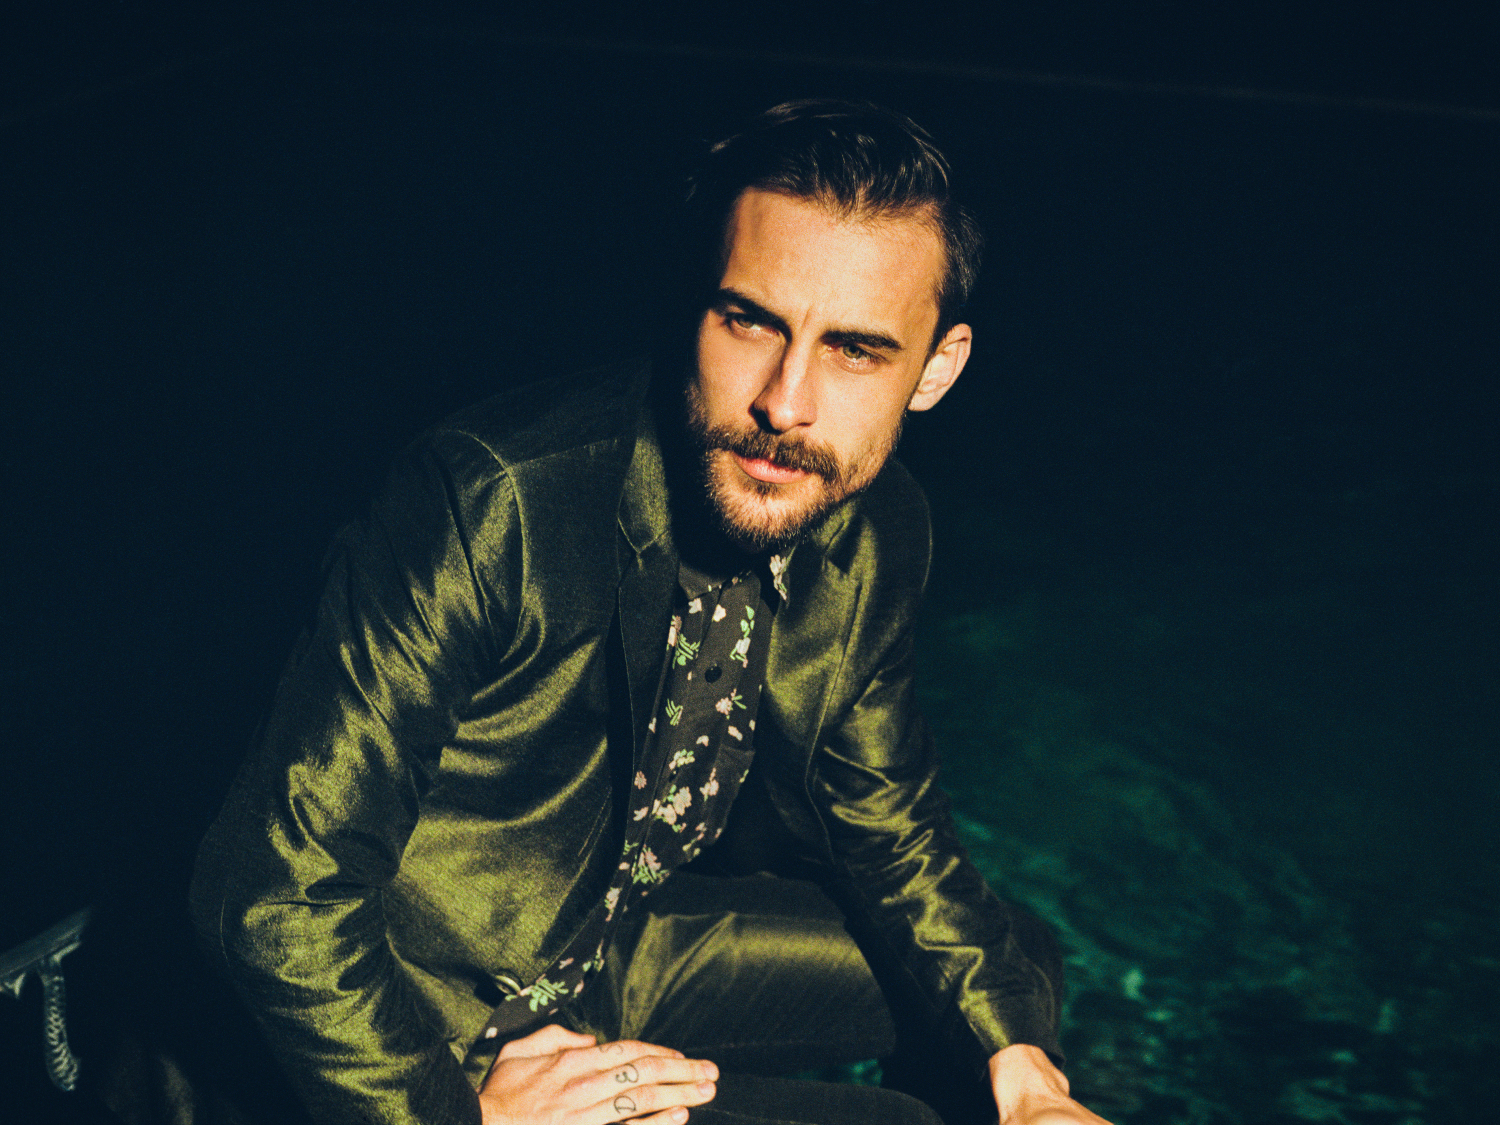 This June! Select number of shows for Robert Ellis and his band